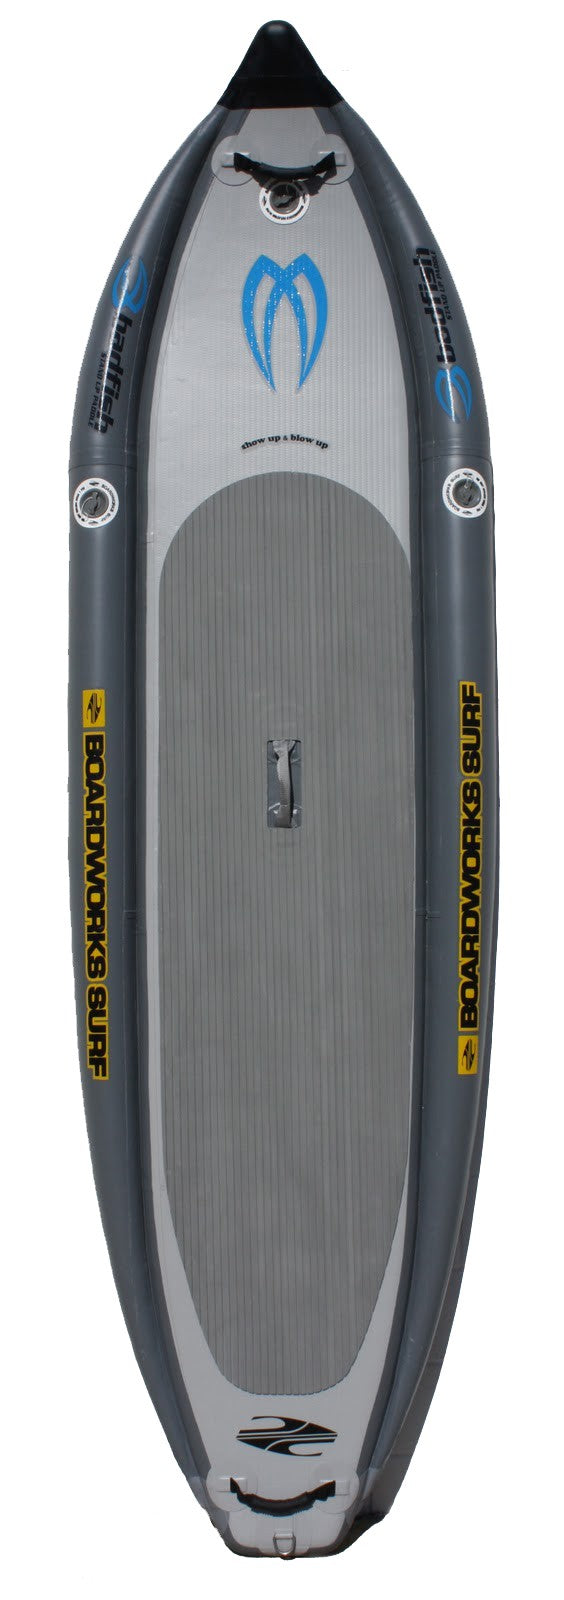 BOARDWORKS - Inflatable Stand Up Paddle - Badfish MCIT 9' - Gray